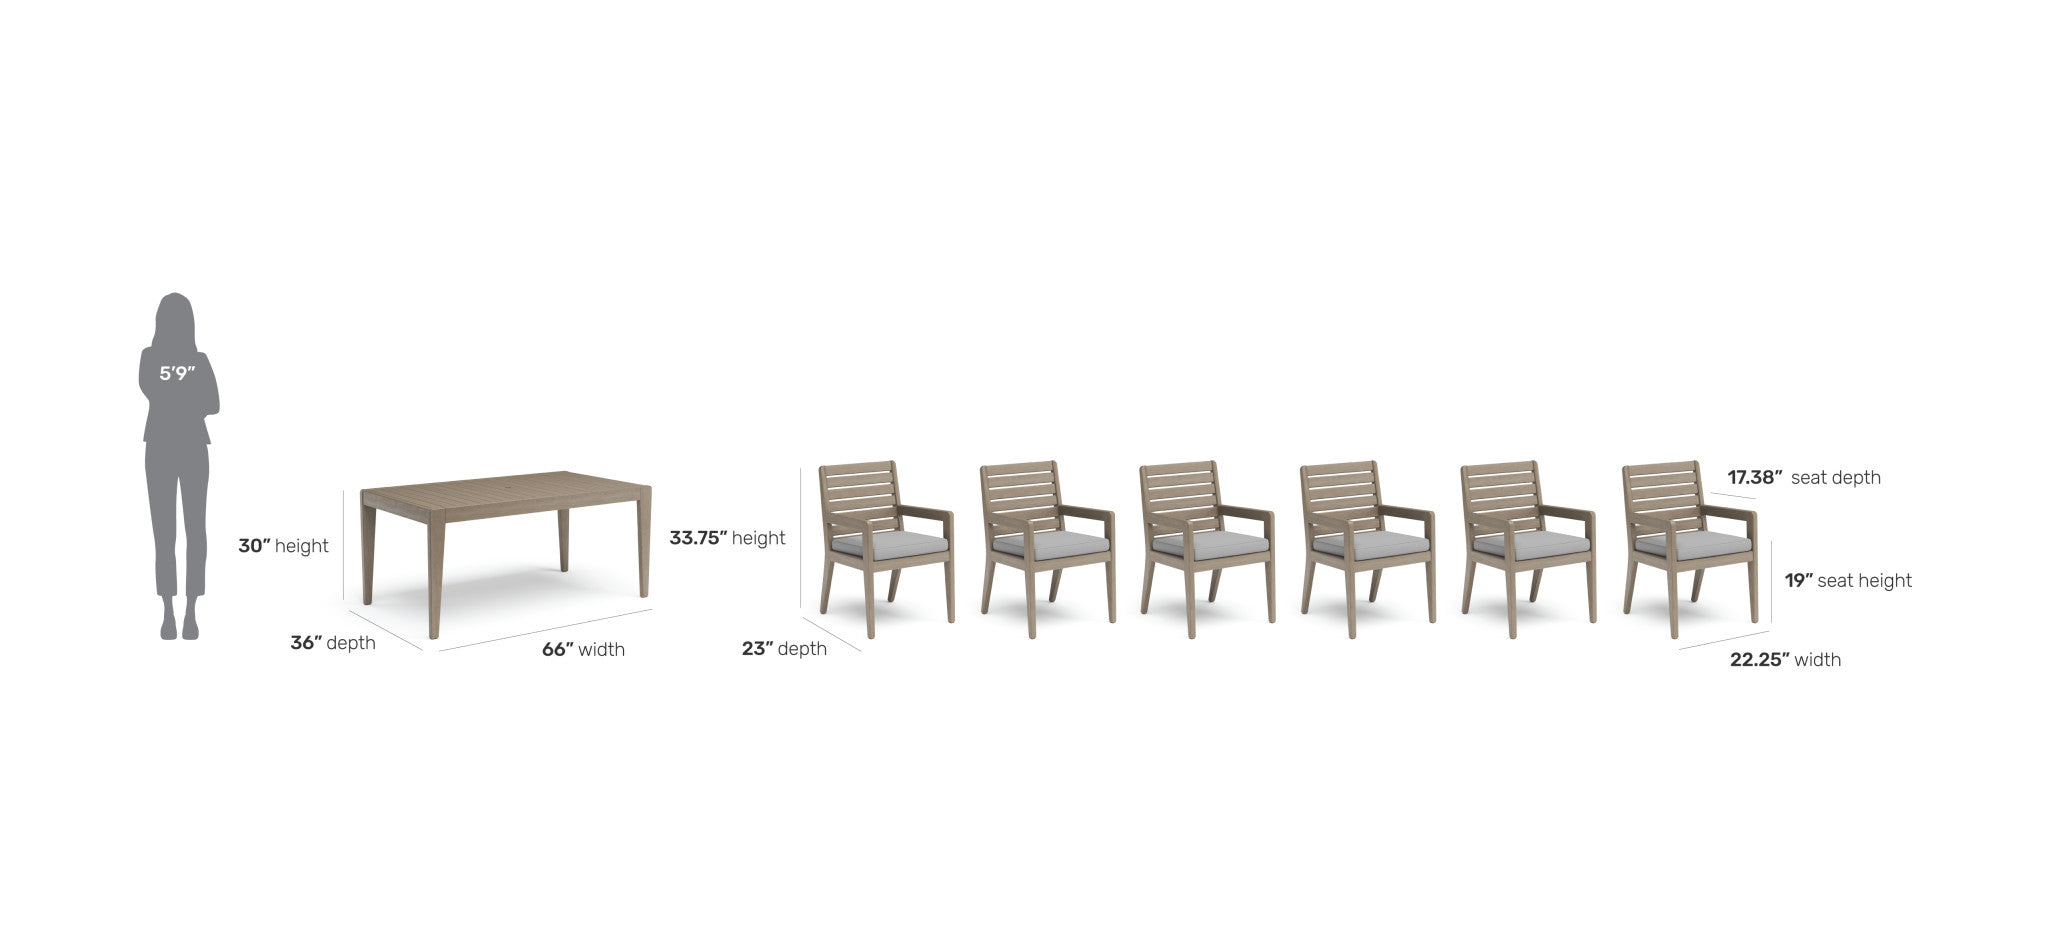 Sustain Outdoor Dining Table and Six Armchairs by Homestyles - Gray - Wood - 5675-31-81S